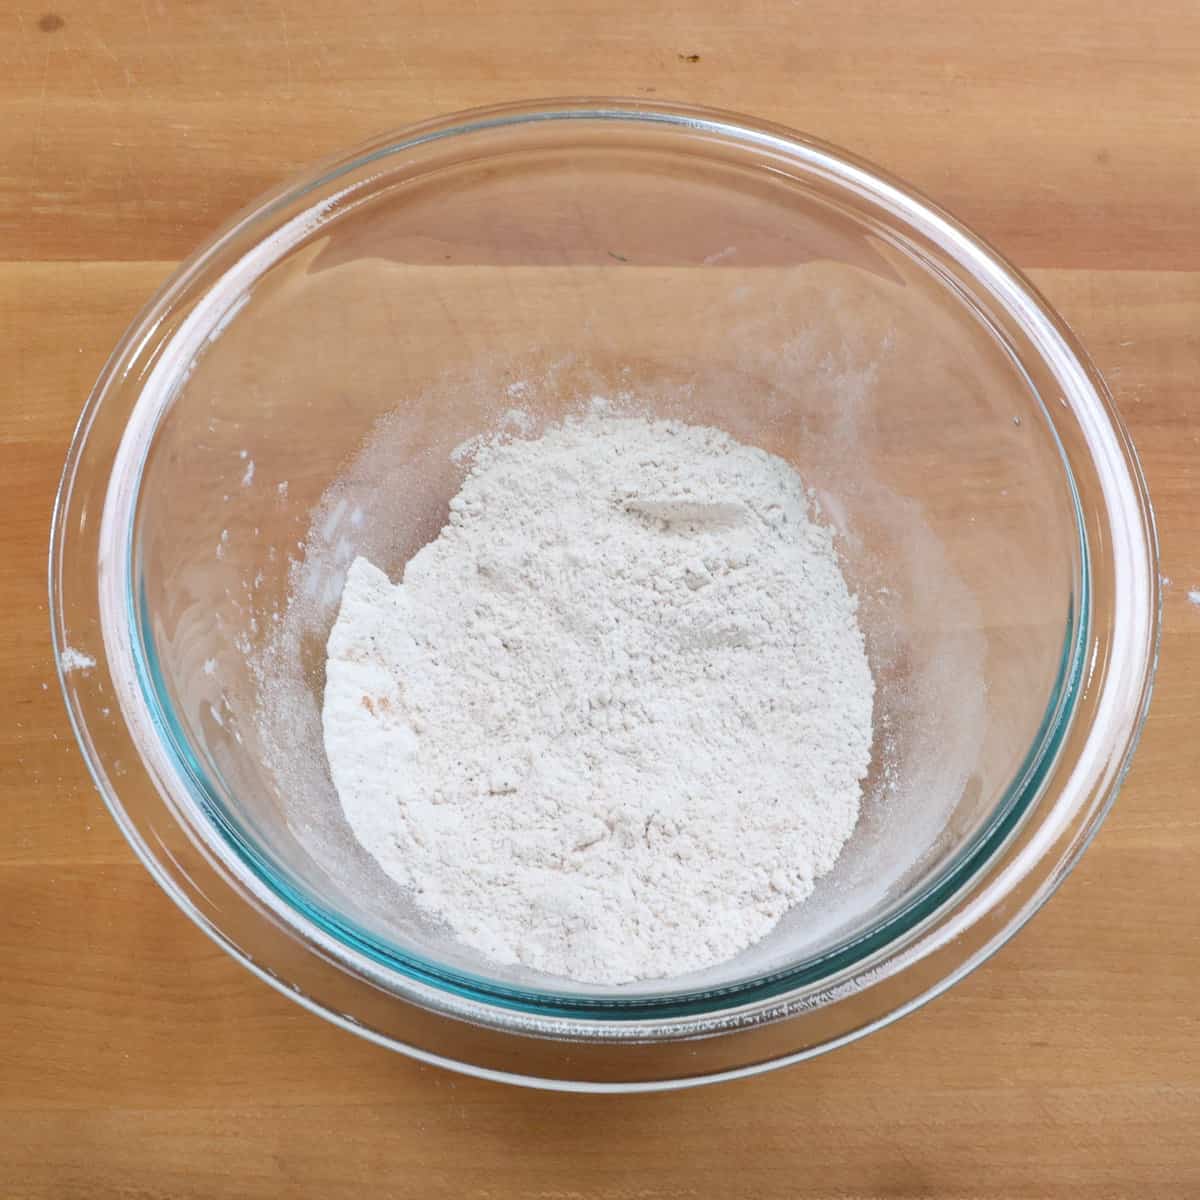 flour, baking soda, cinnamon, and salt in a mixing bowl.